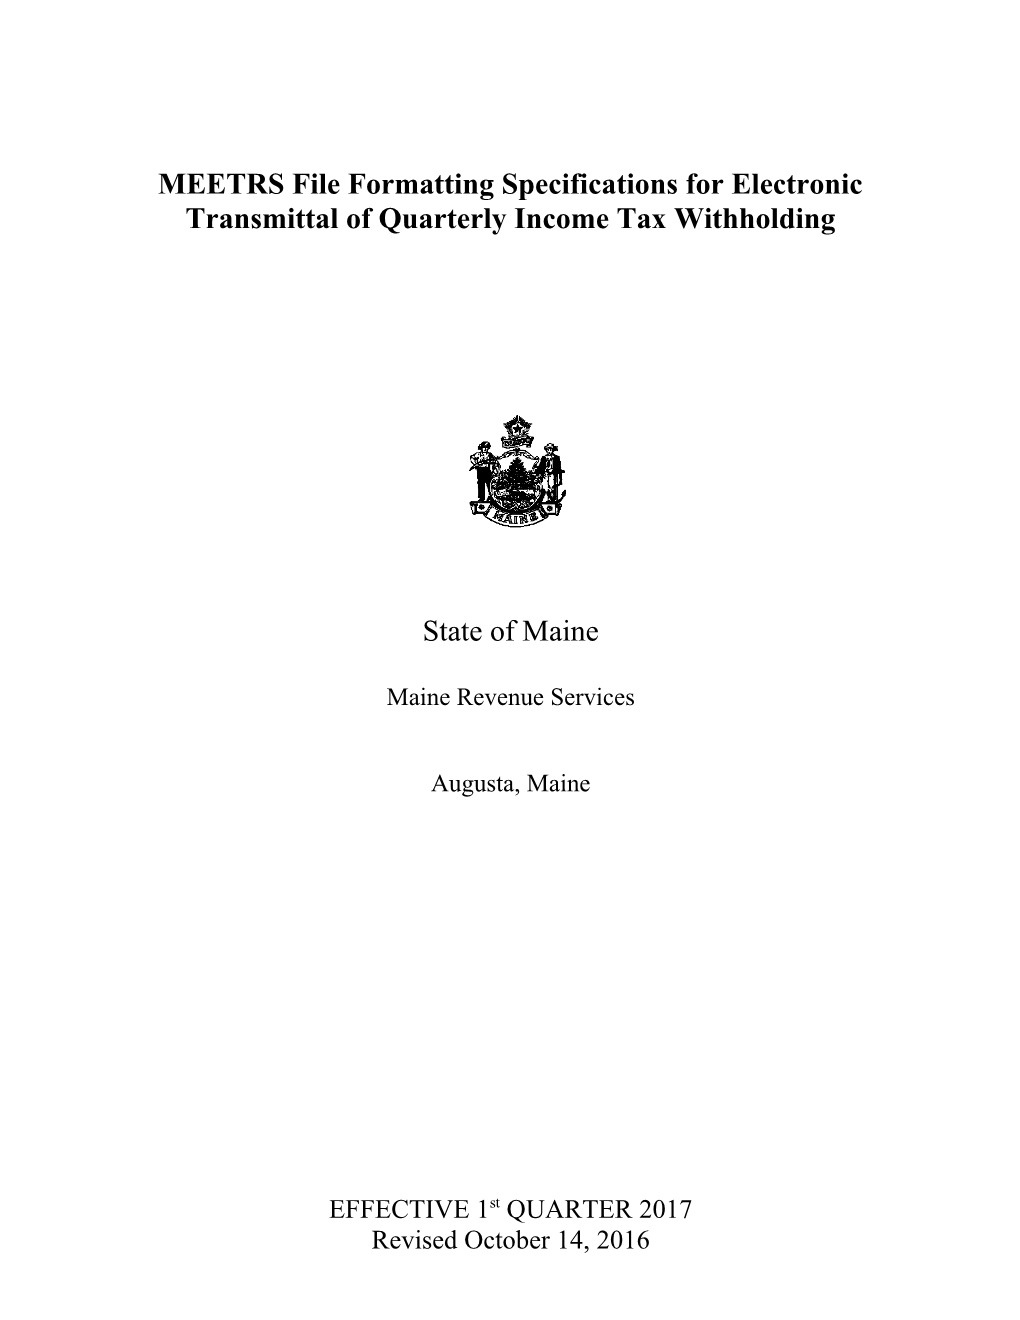 Maine ICESA File Formatting Specifications for Electronic Transmittal of Income Tax Withholding